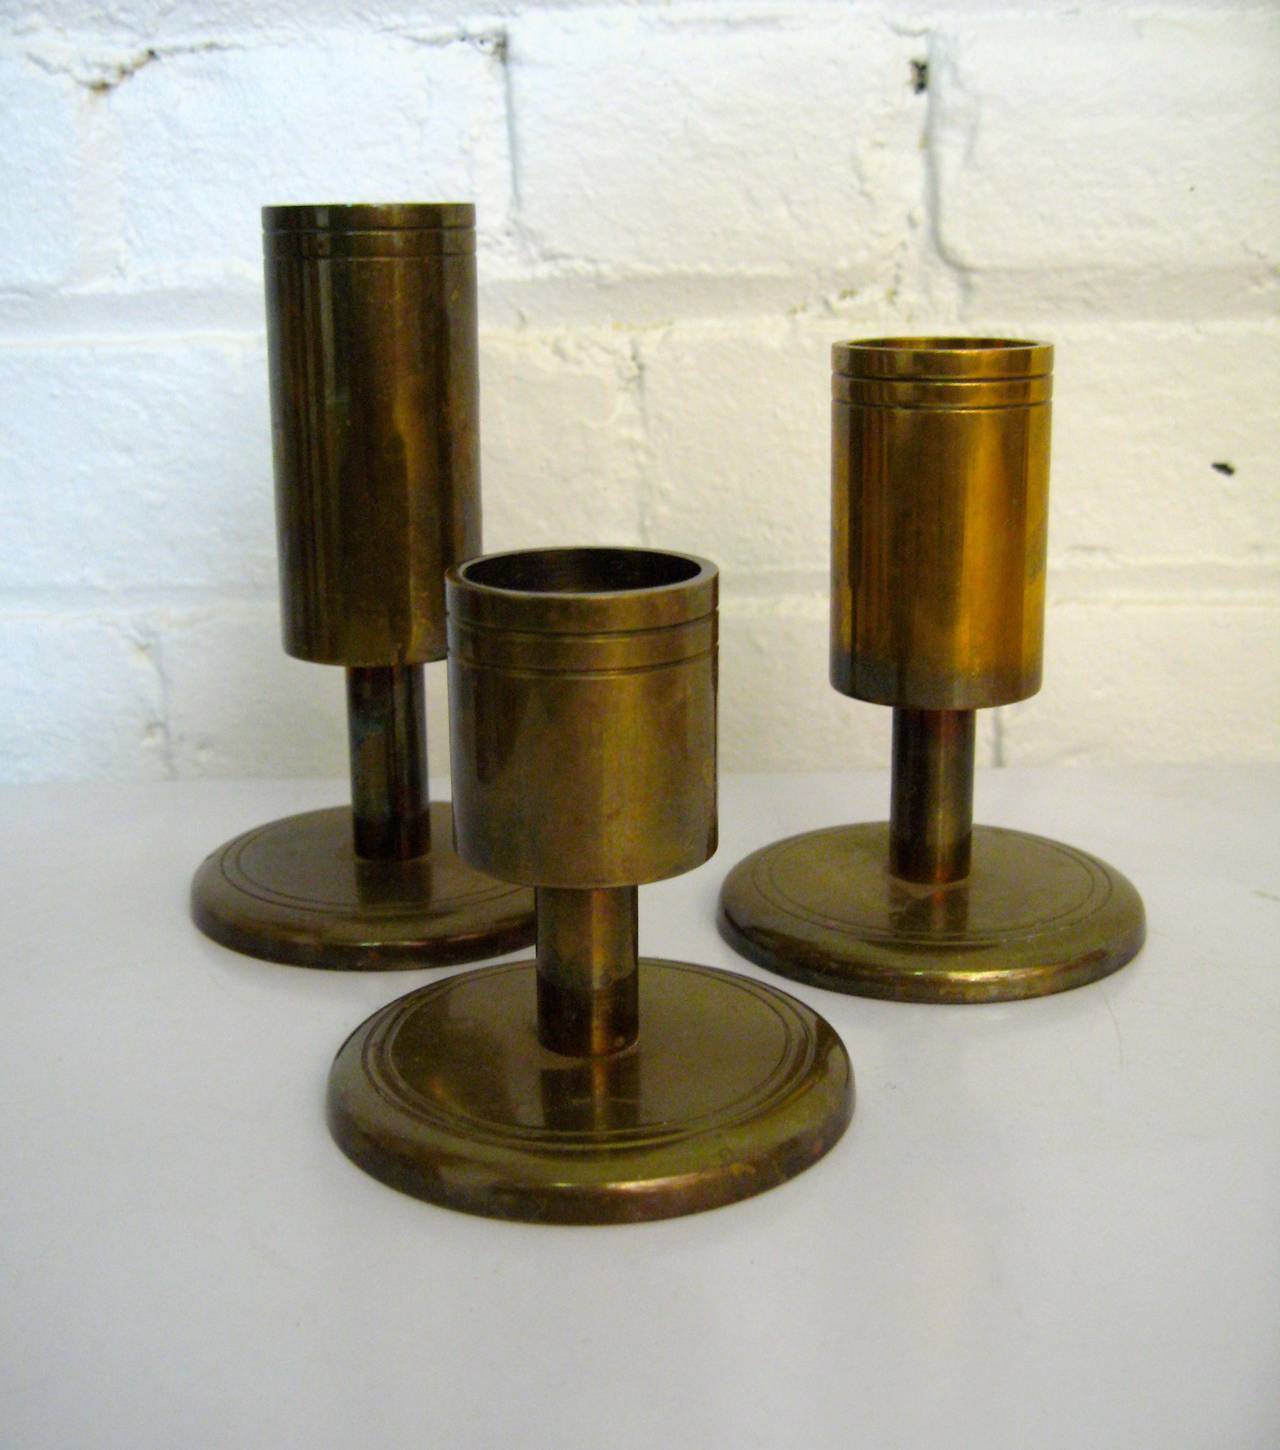 Three solid brass tiered candle holders.  Signed on bottom with gold foil label, Dan Present Ltd., Denmark.  Varying sizes with 3